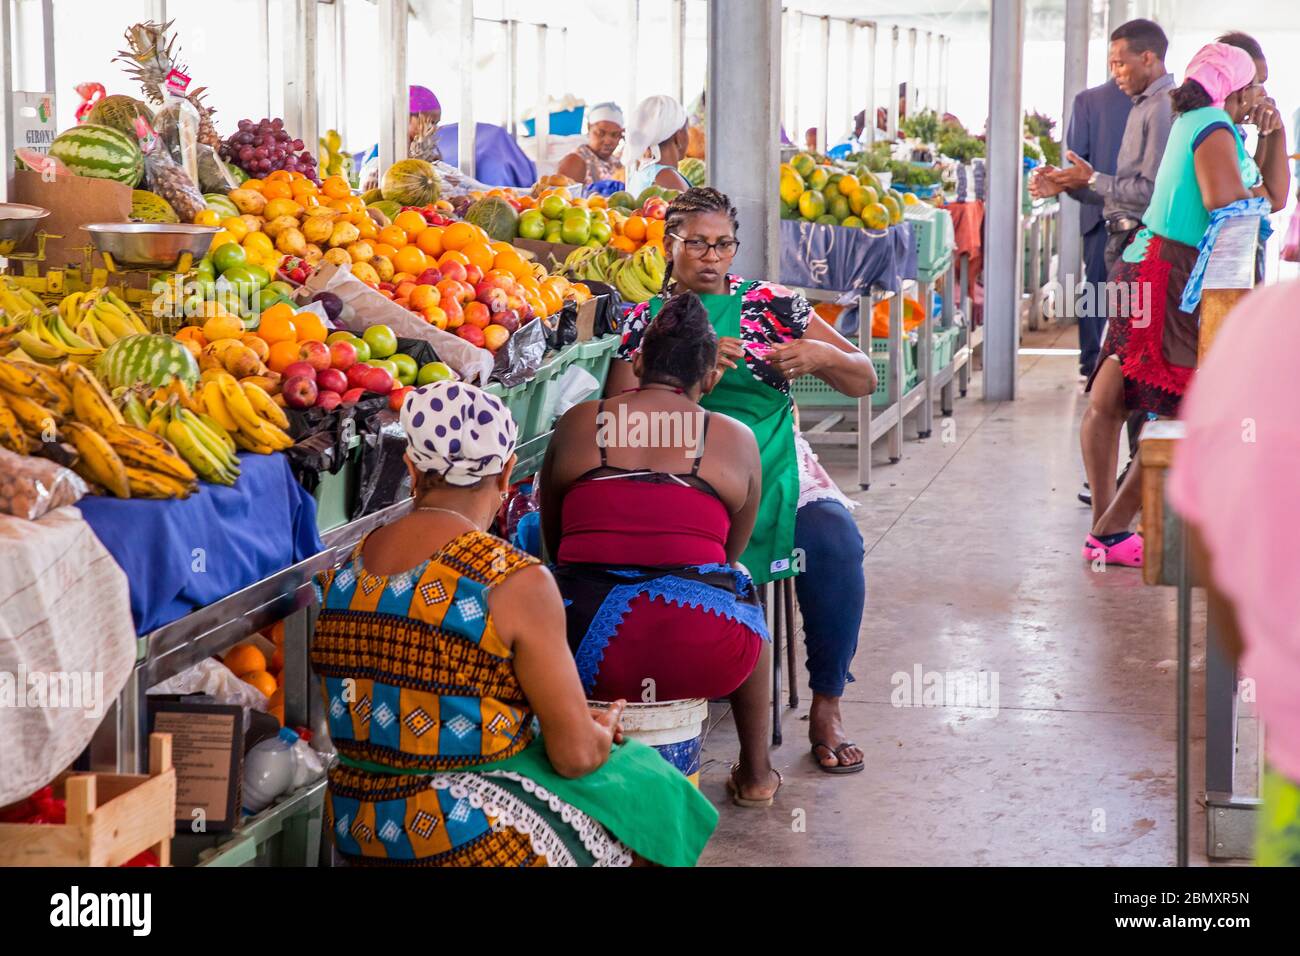 Stands with female Cape Verdean vendors selling fresh fruit at indoor food market in the city Praia on the island Santiago, Cape Verde / Cabo Verde Stock Photo